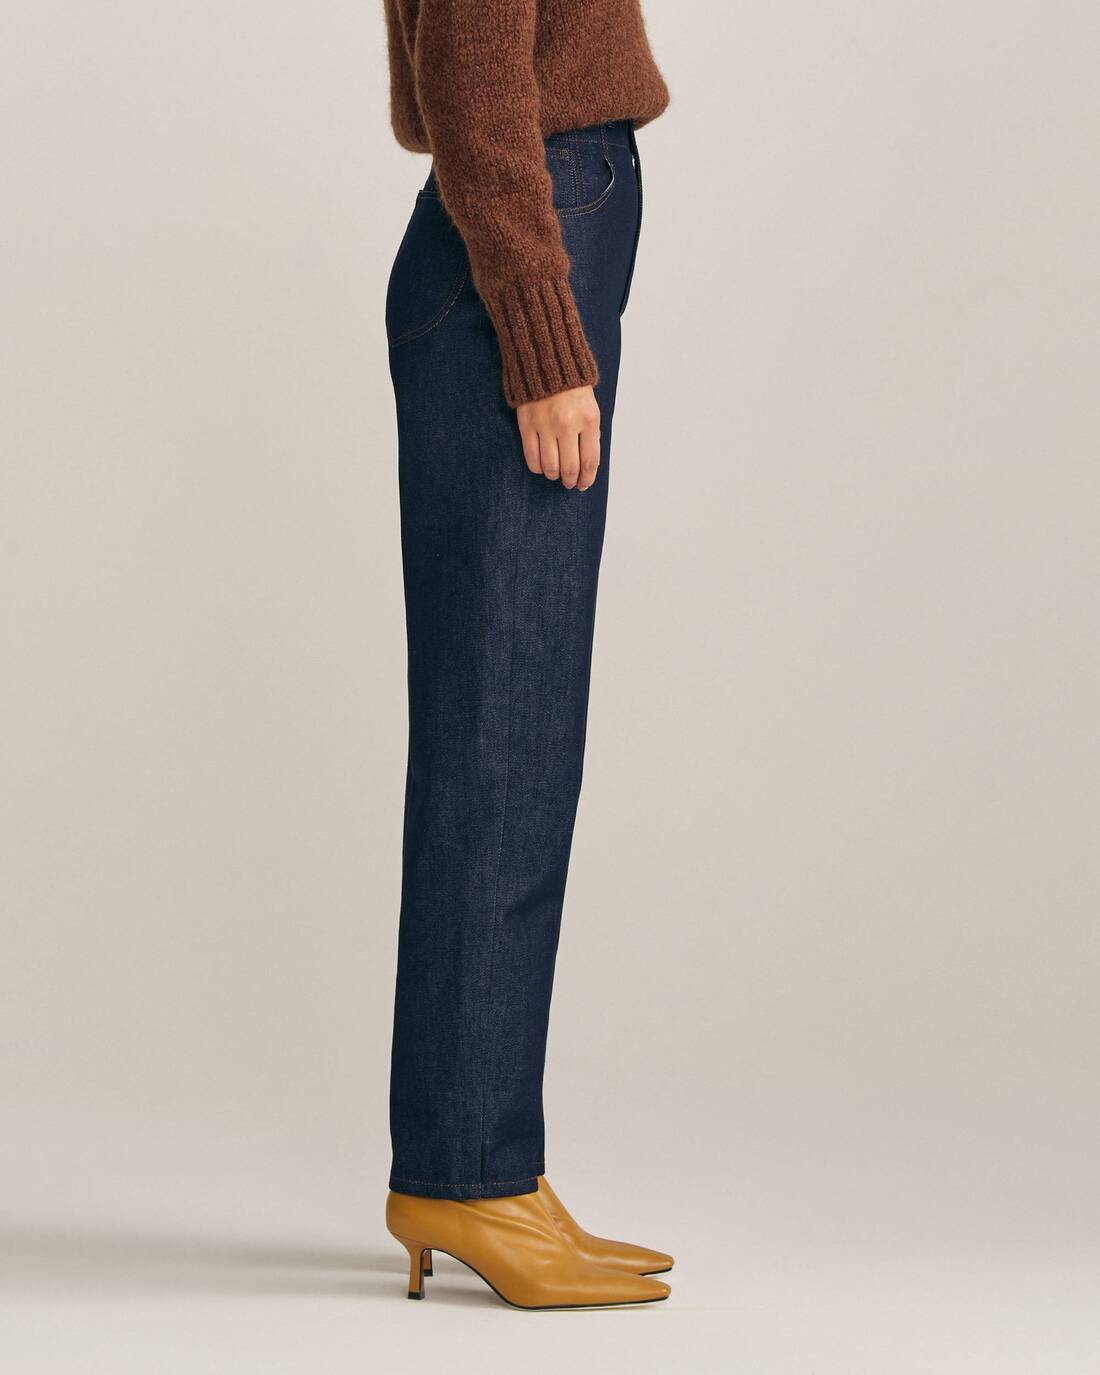 High-waisted cigarette-style trousers 